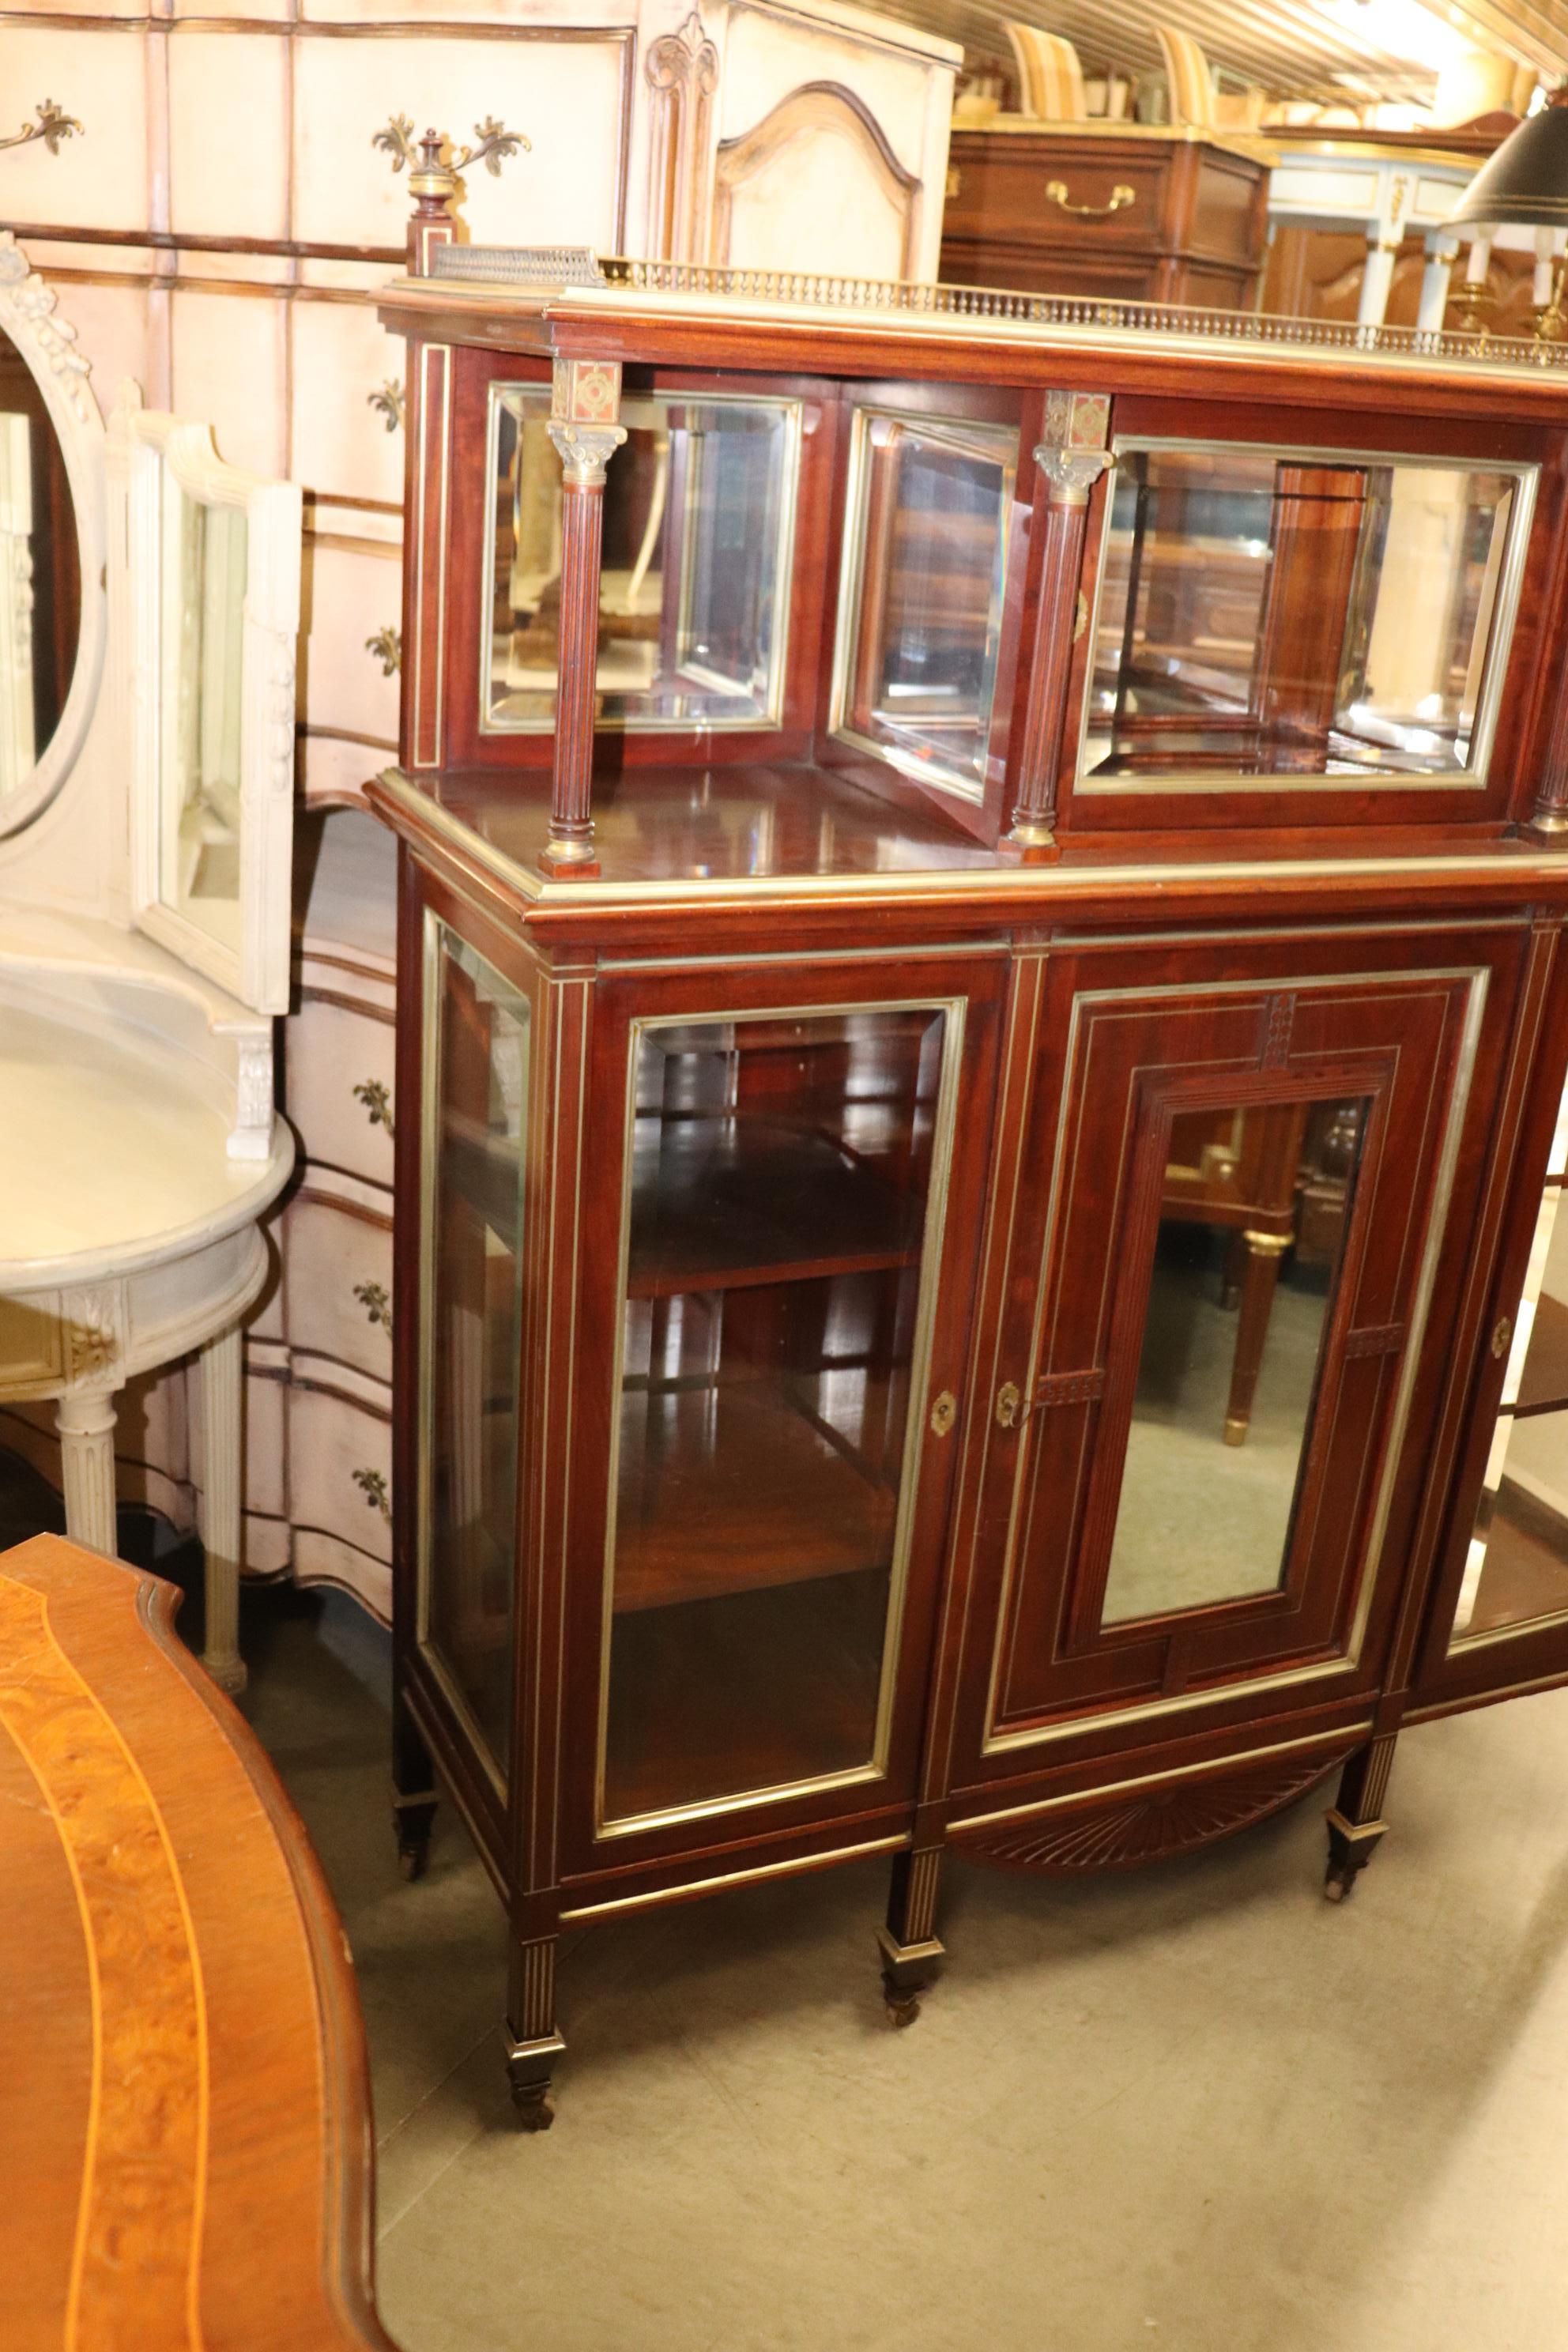 This fantastic Aesthetic Movement beveled mirror etagere at first looks French but it's actually a design that was adapted in the USA during the Victorian era. The piece is made of solid mahogany and features mirrored panels and beautiful cast